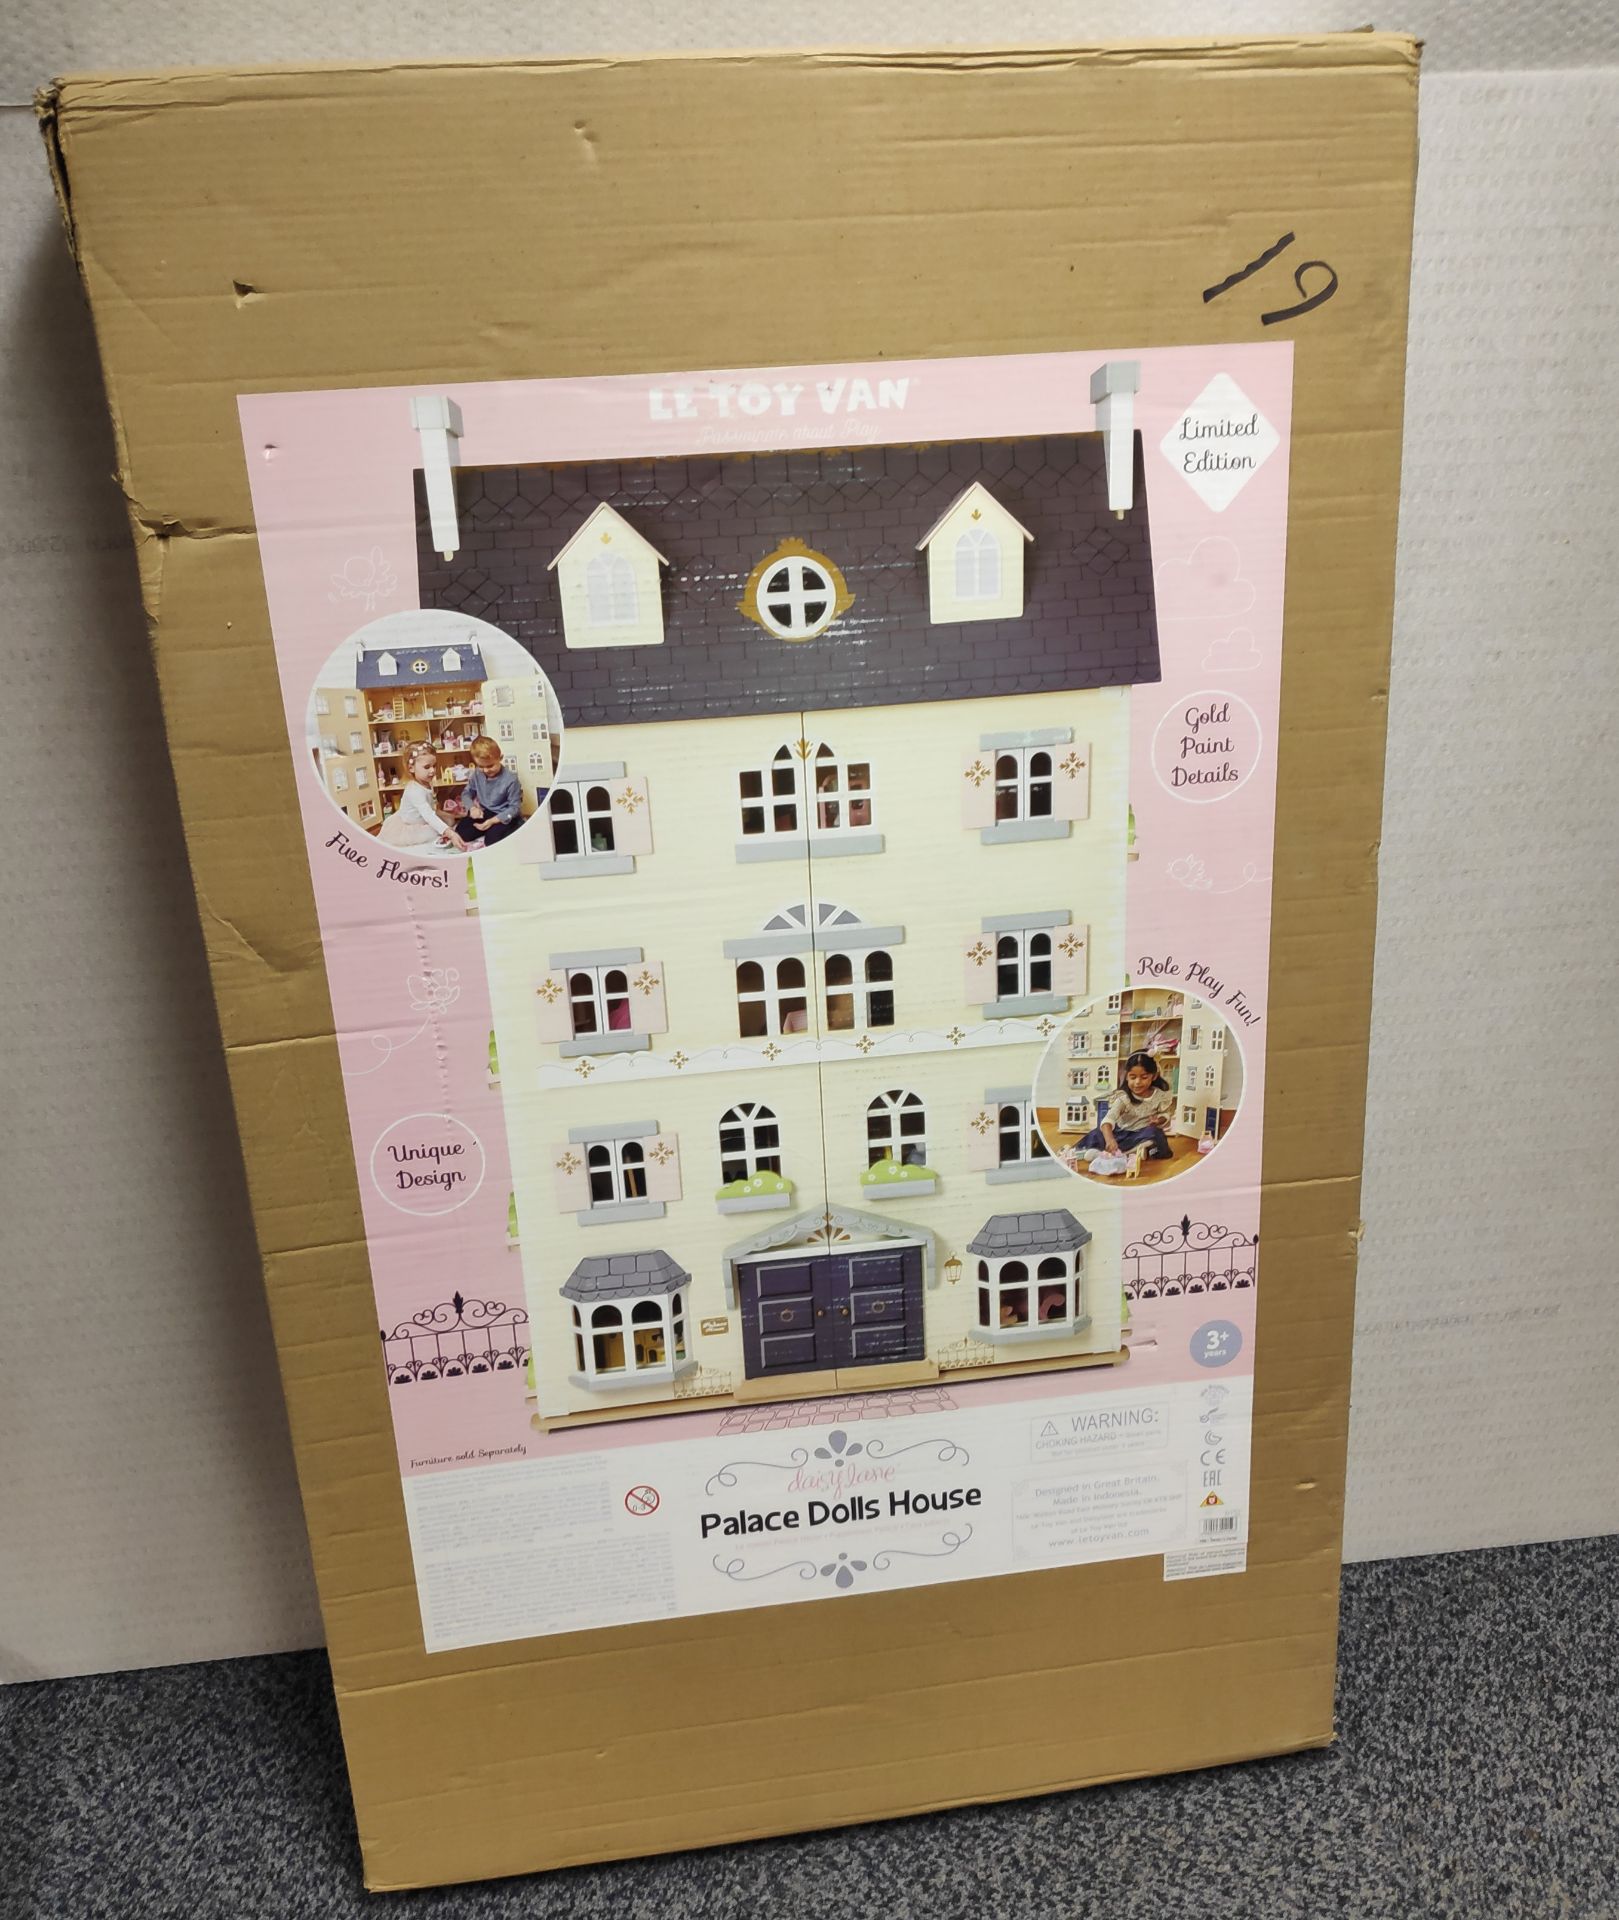 1 x Le Toy Van Wooden Palace Dolls House - New/Boxed - HTYS163 - CL987 - Location: Altrincham WA14 - - Image 3 of 10